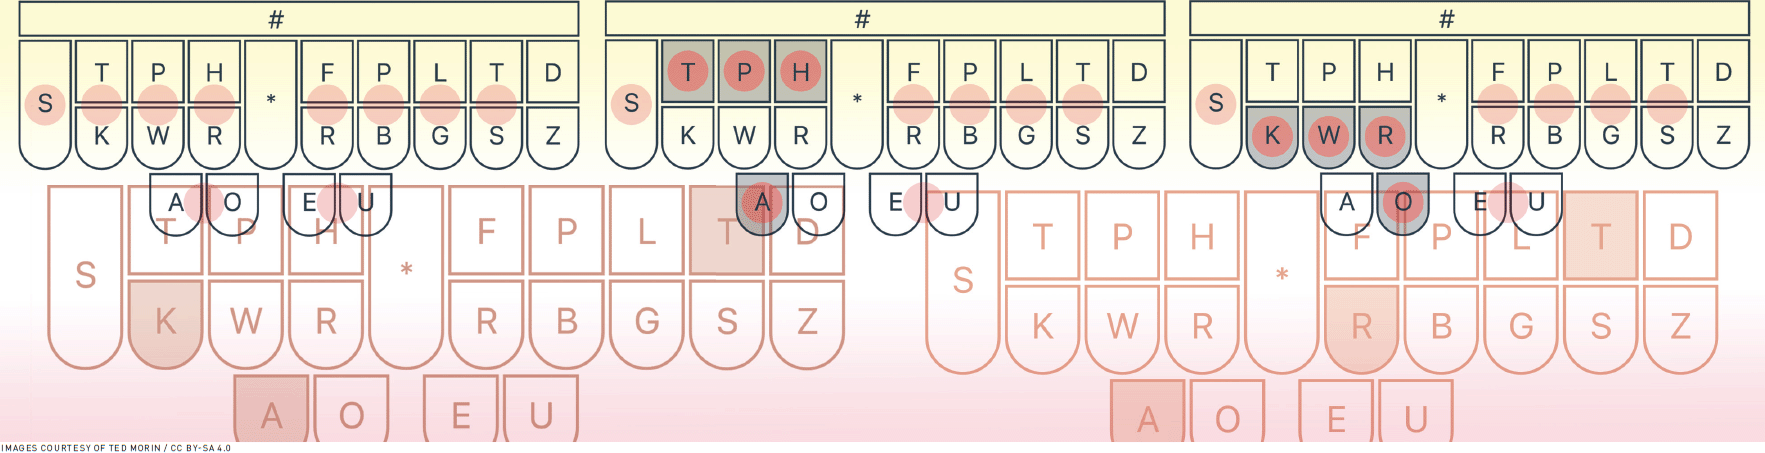 An artistic image depicting key diagrams of steno keyboards adjacent to and overlapping with one another